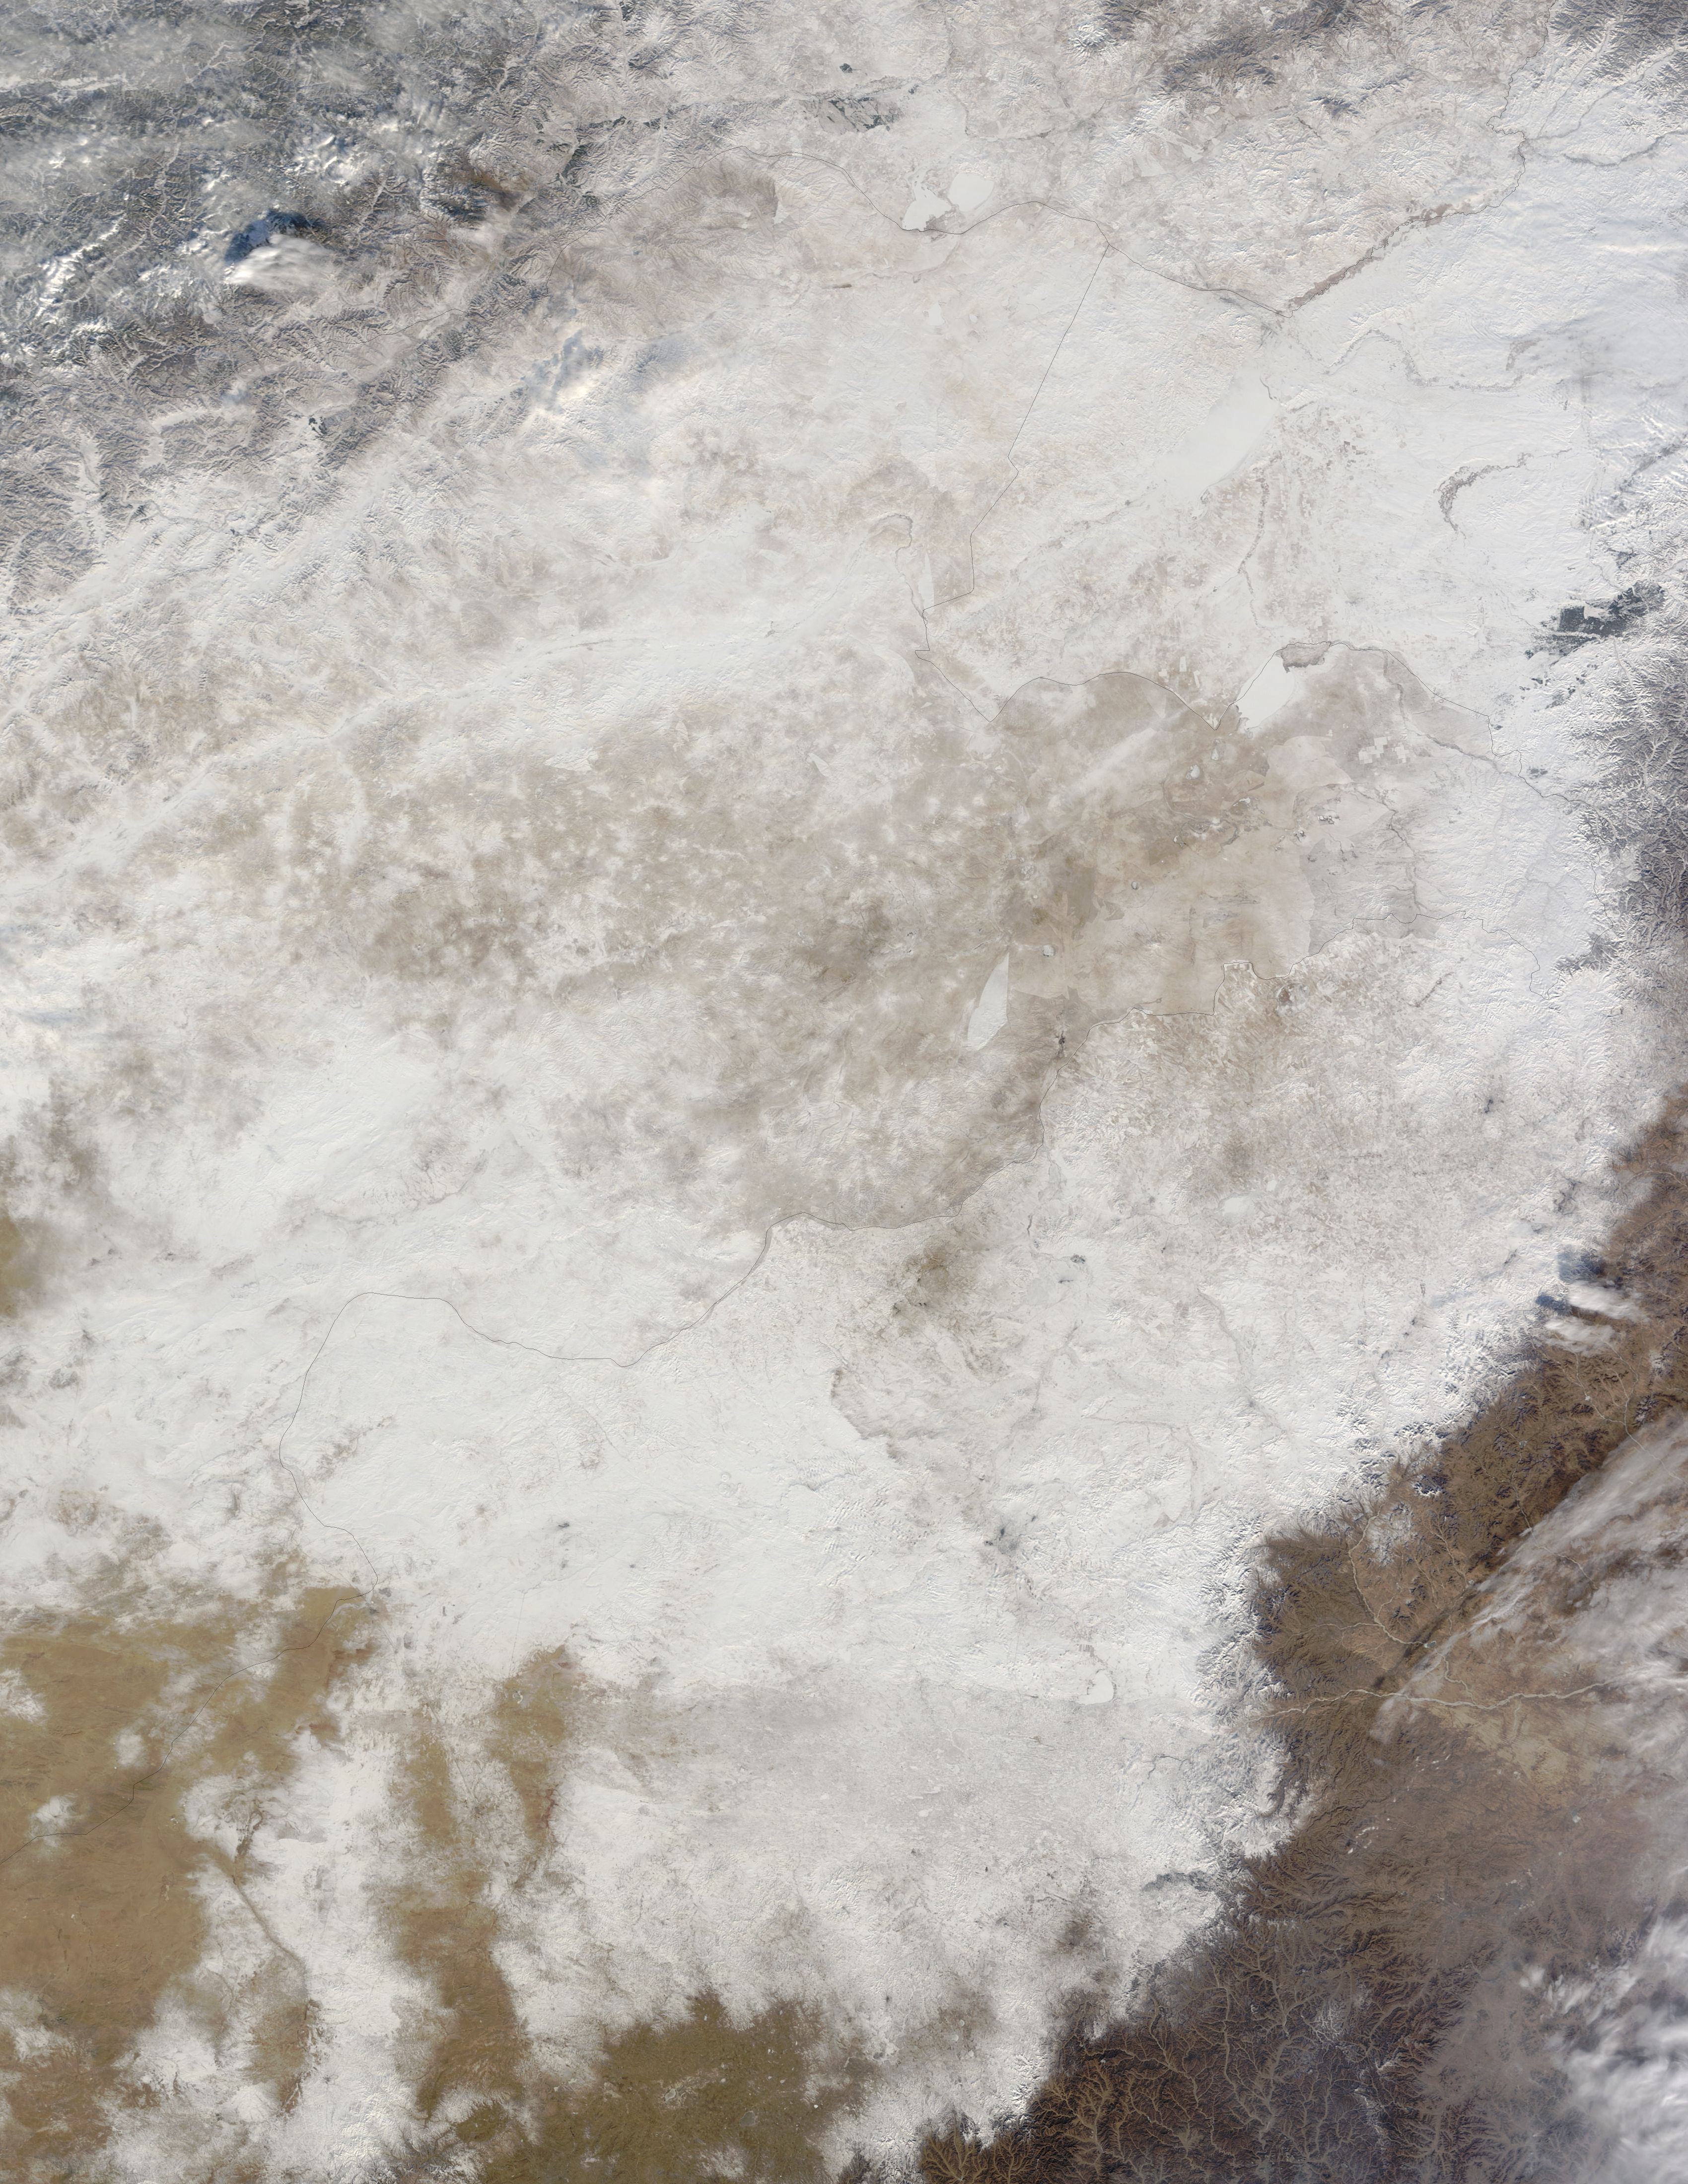 Snow in Russia, Mongolia, and China - related image preview